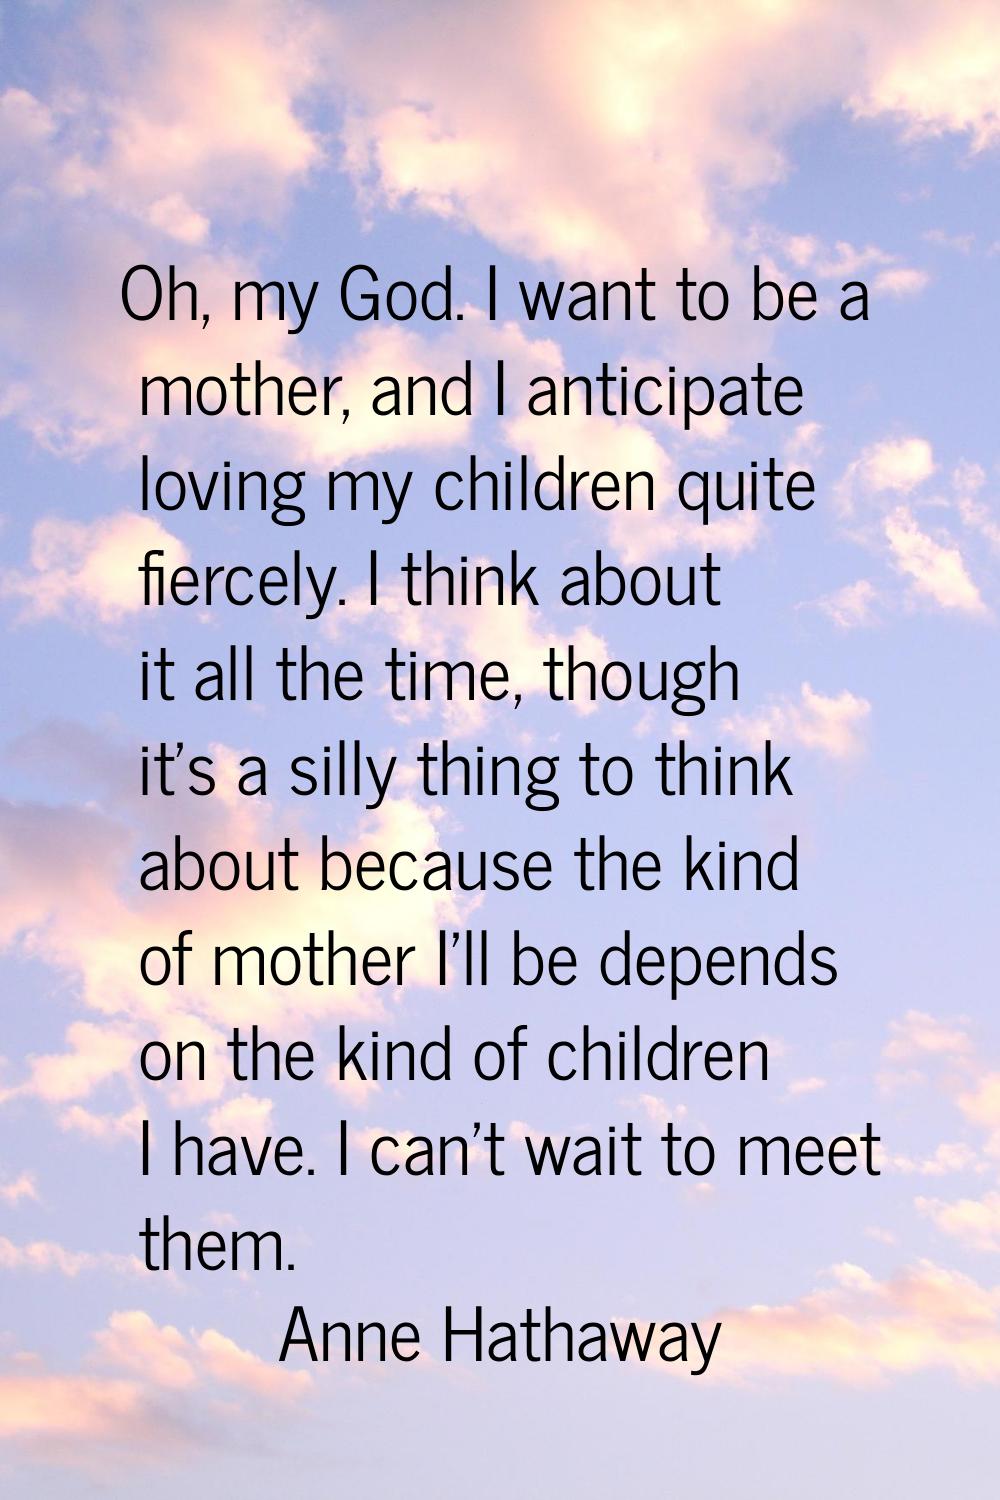 Oh, my God. I want to be a mother, and I anticipate loving my children quite fiercely. I think abou